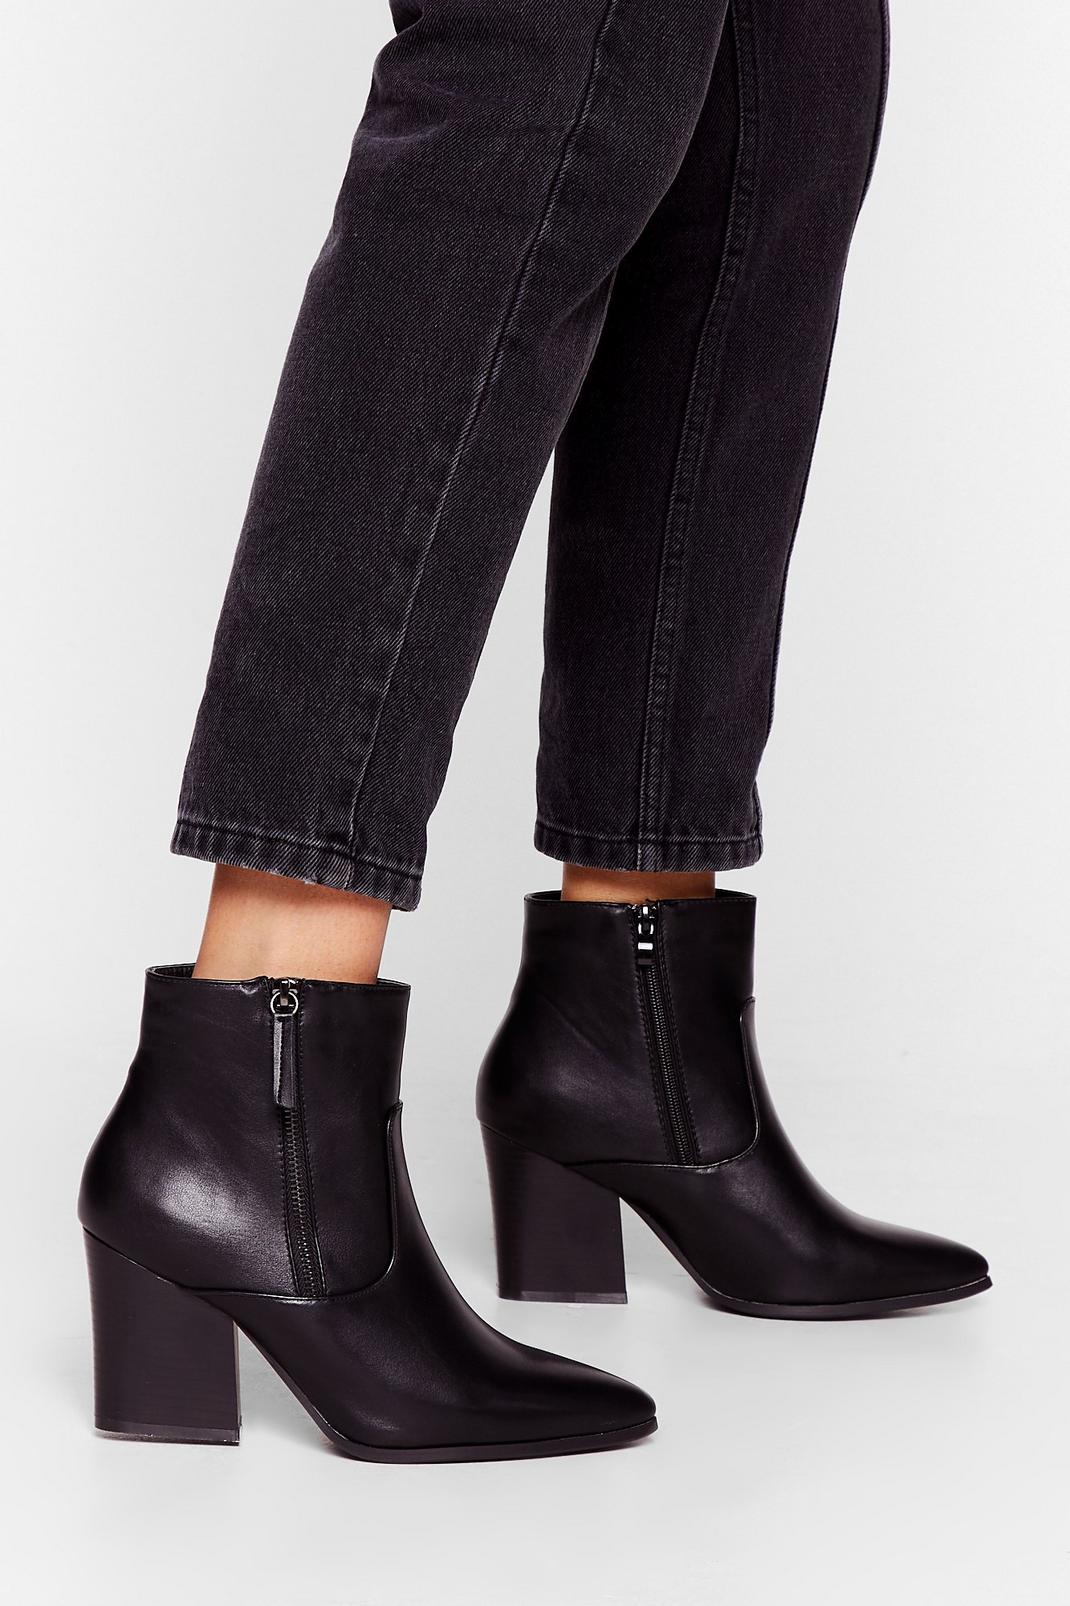 The Point is Faux Leather Boots | Nasty Gal